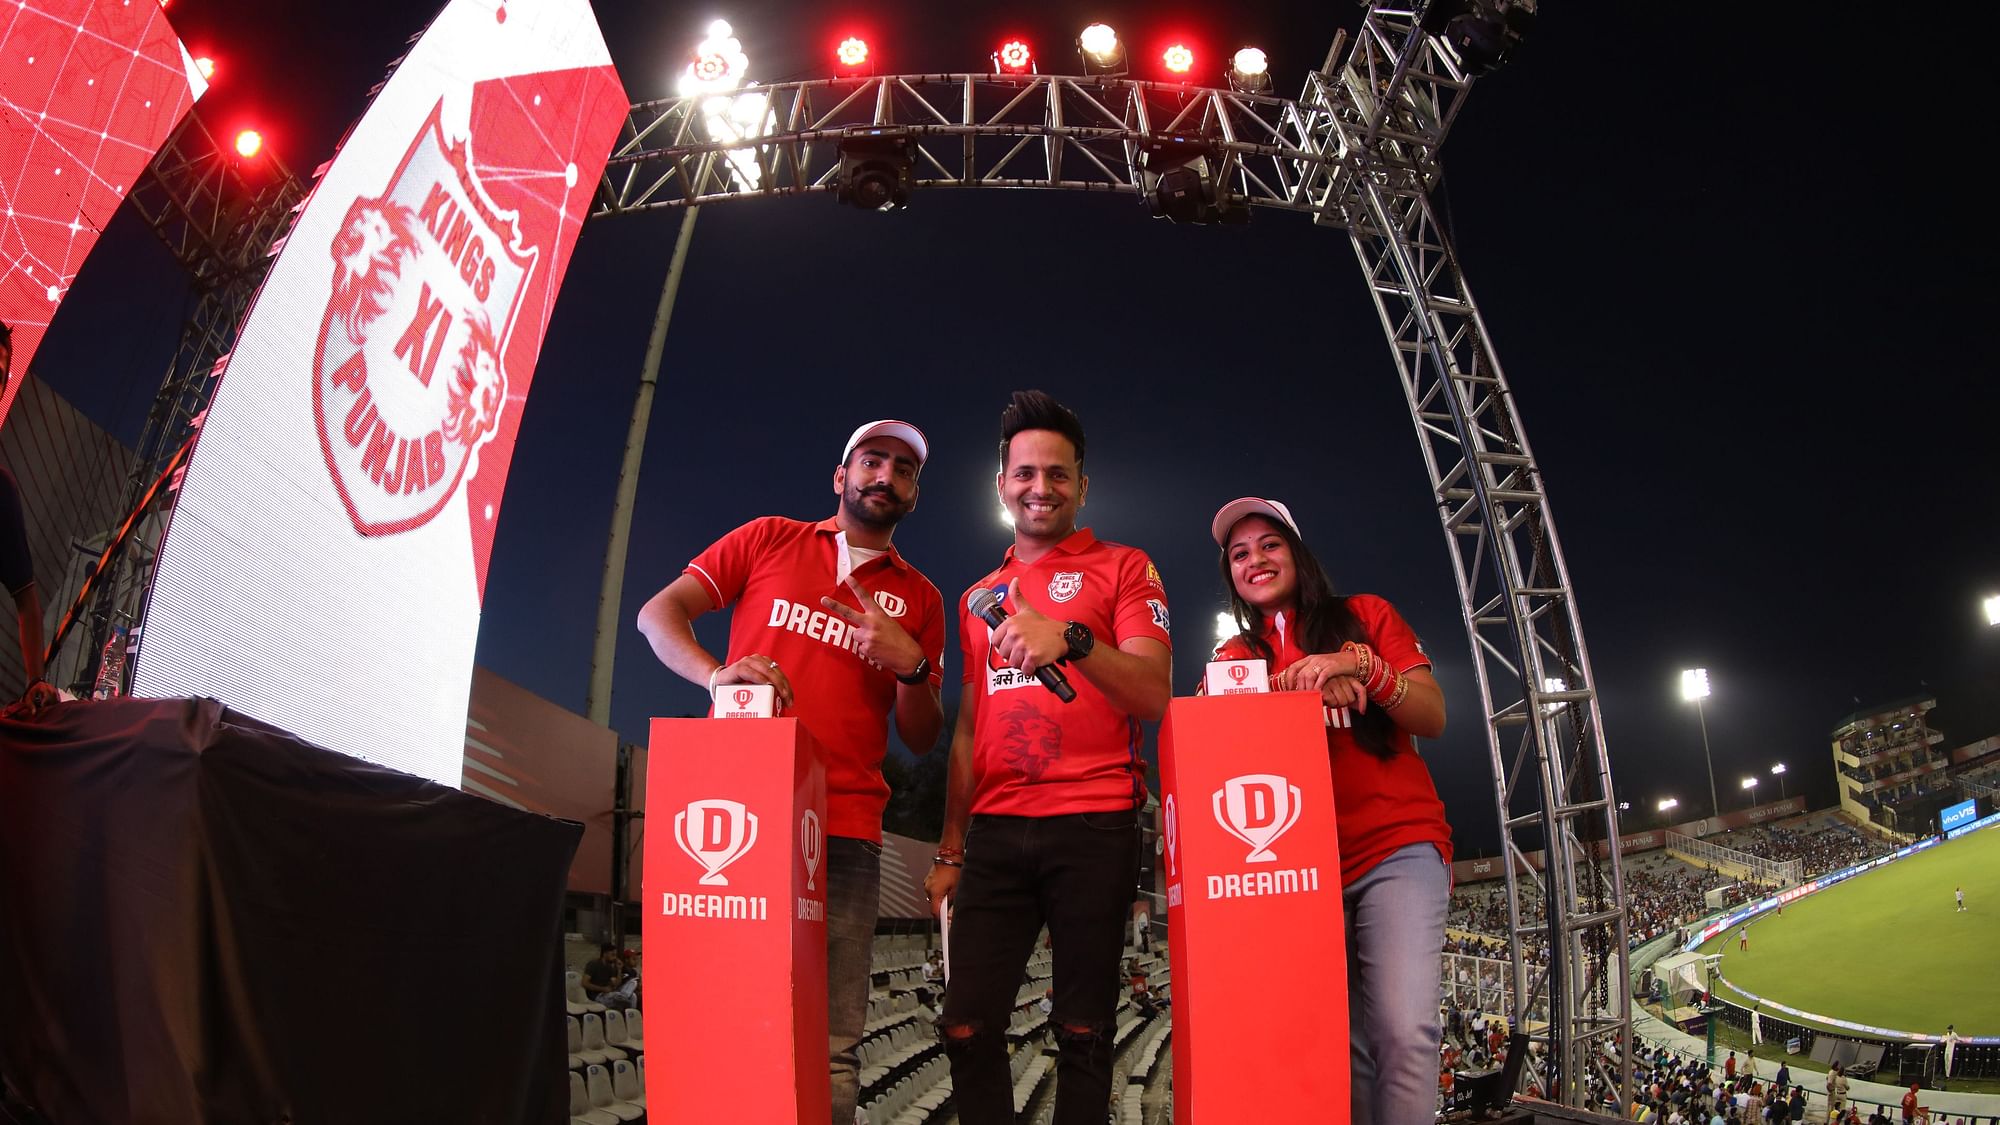 Fantasy cricket app Dream11 has bagged IPL’s title sponsorship deal for Rs 222 crore, ANI has quoted IPL Chairman Brijesh Patel as having confirmed.